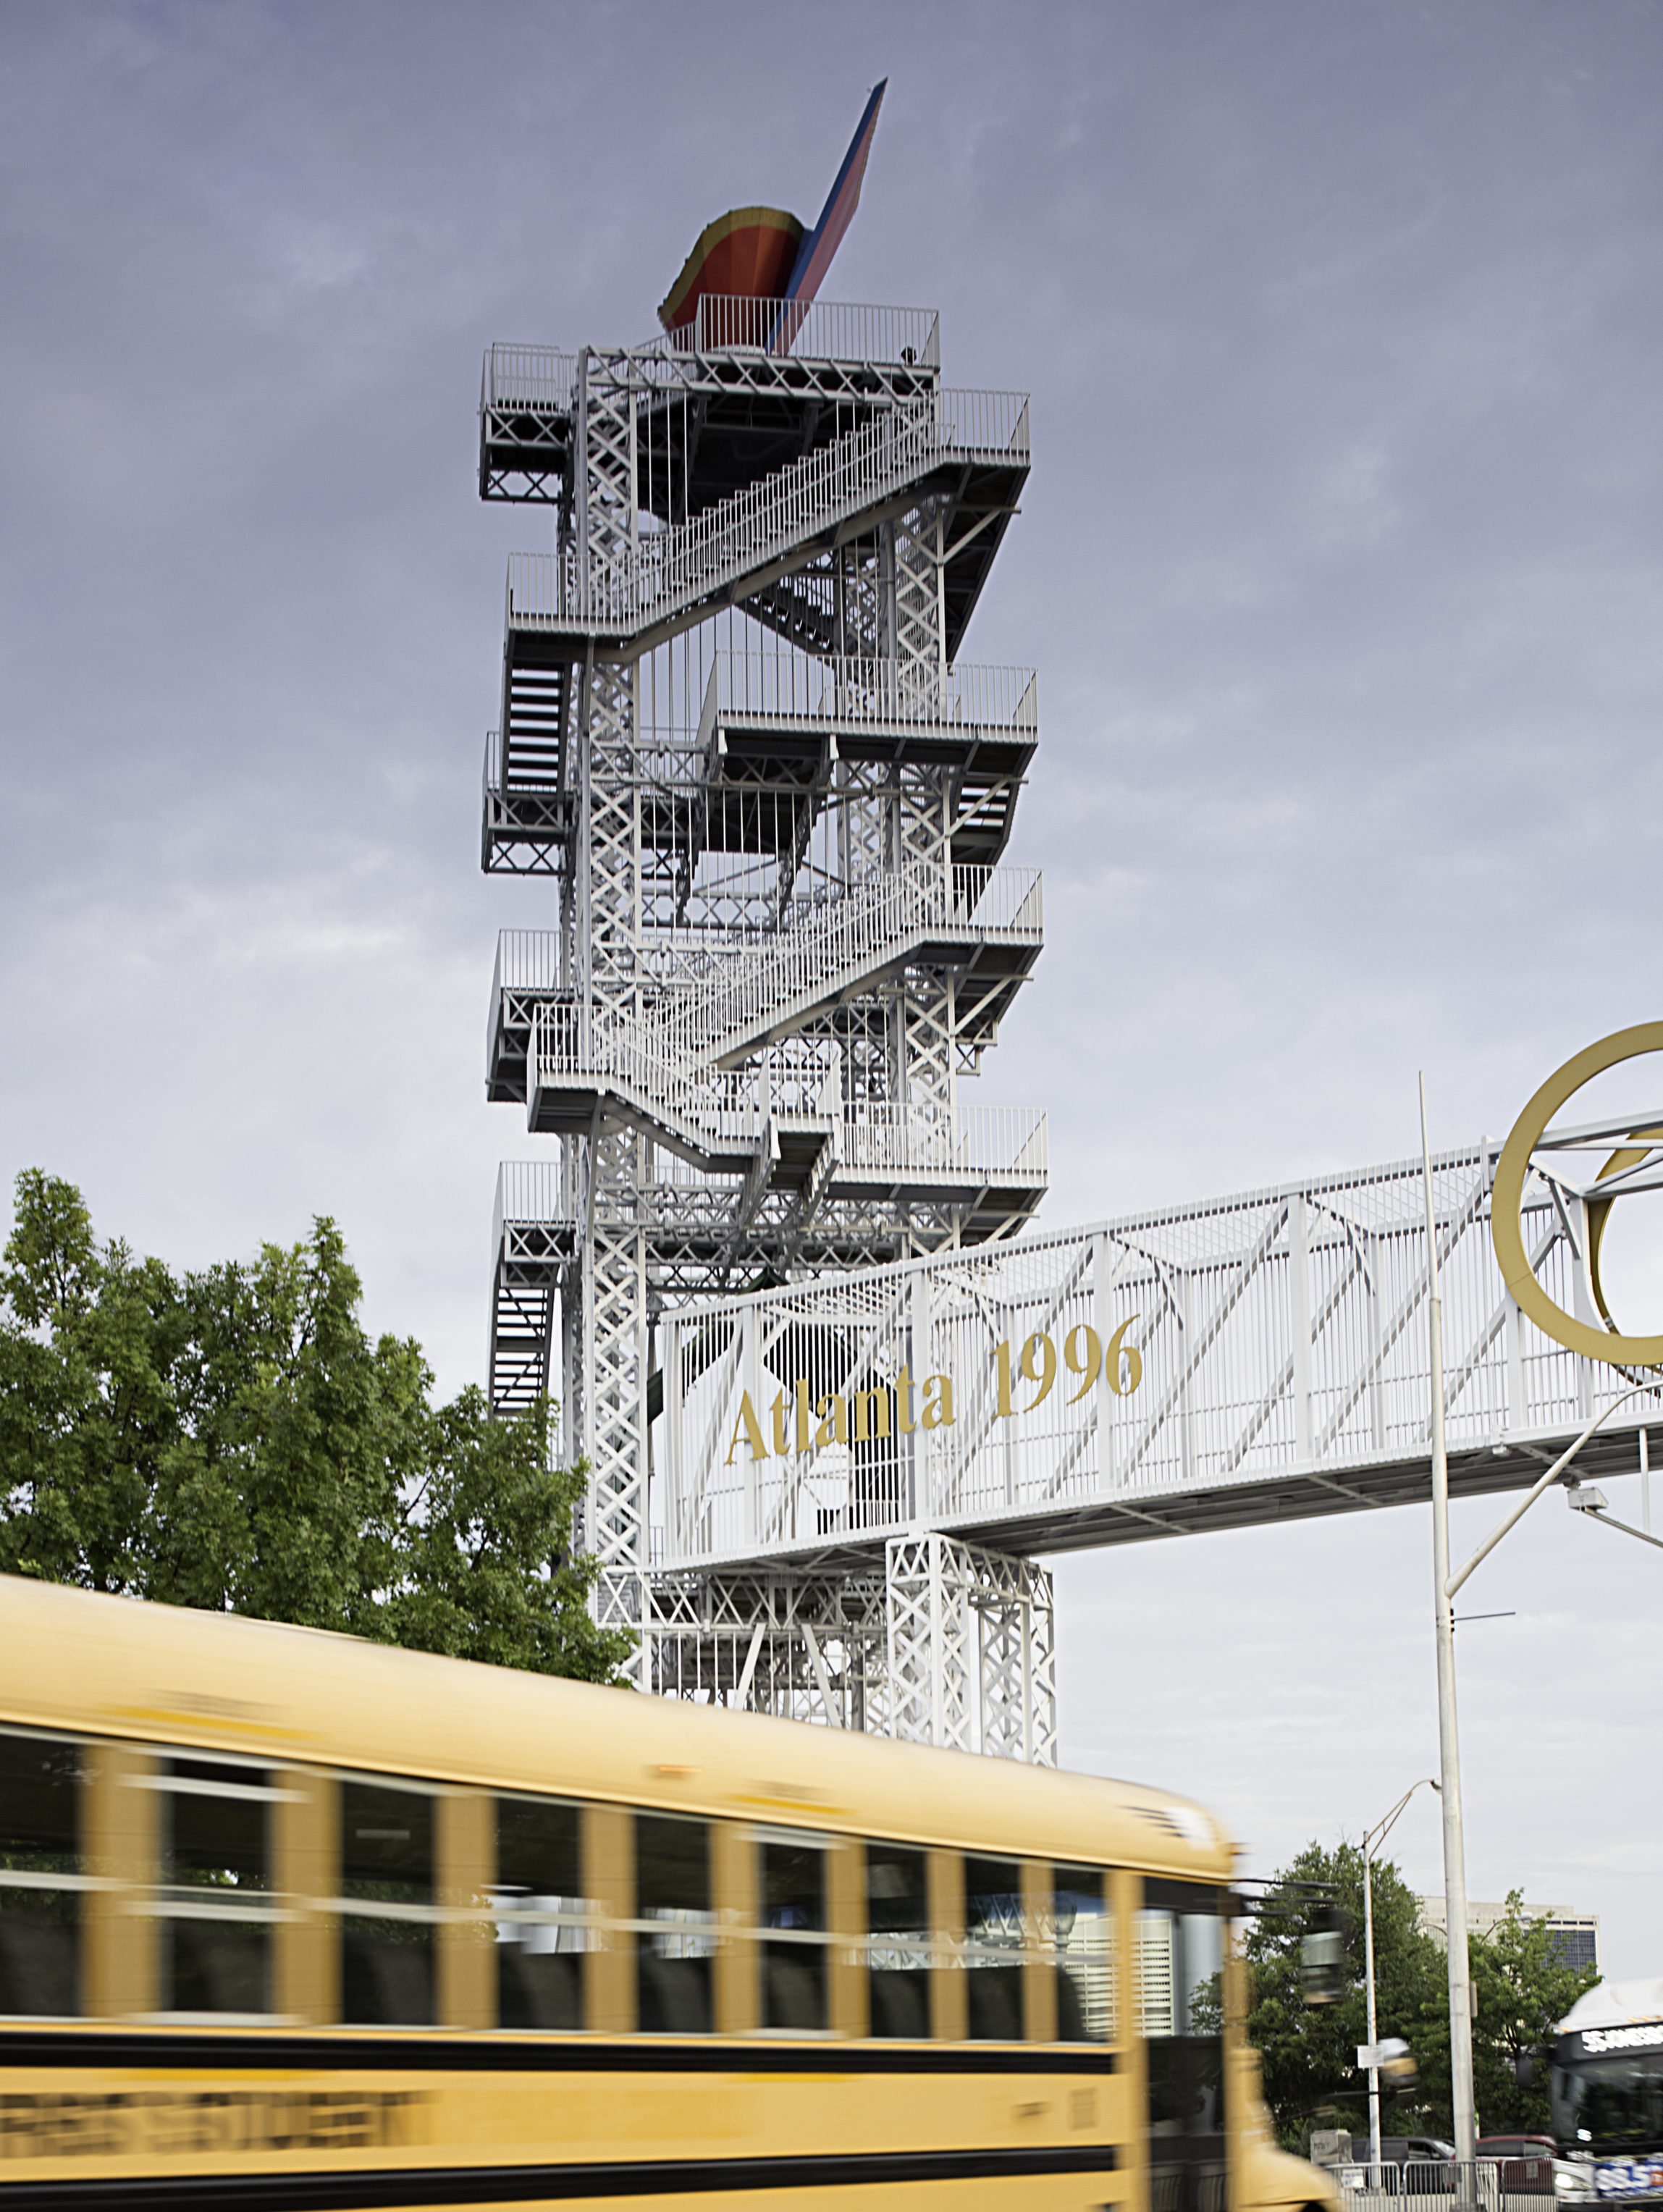 A closeup image of the Olympic Cauldron in Atlanta with a yellow school bus passing by, by Johnathon Kelso.